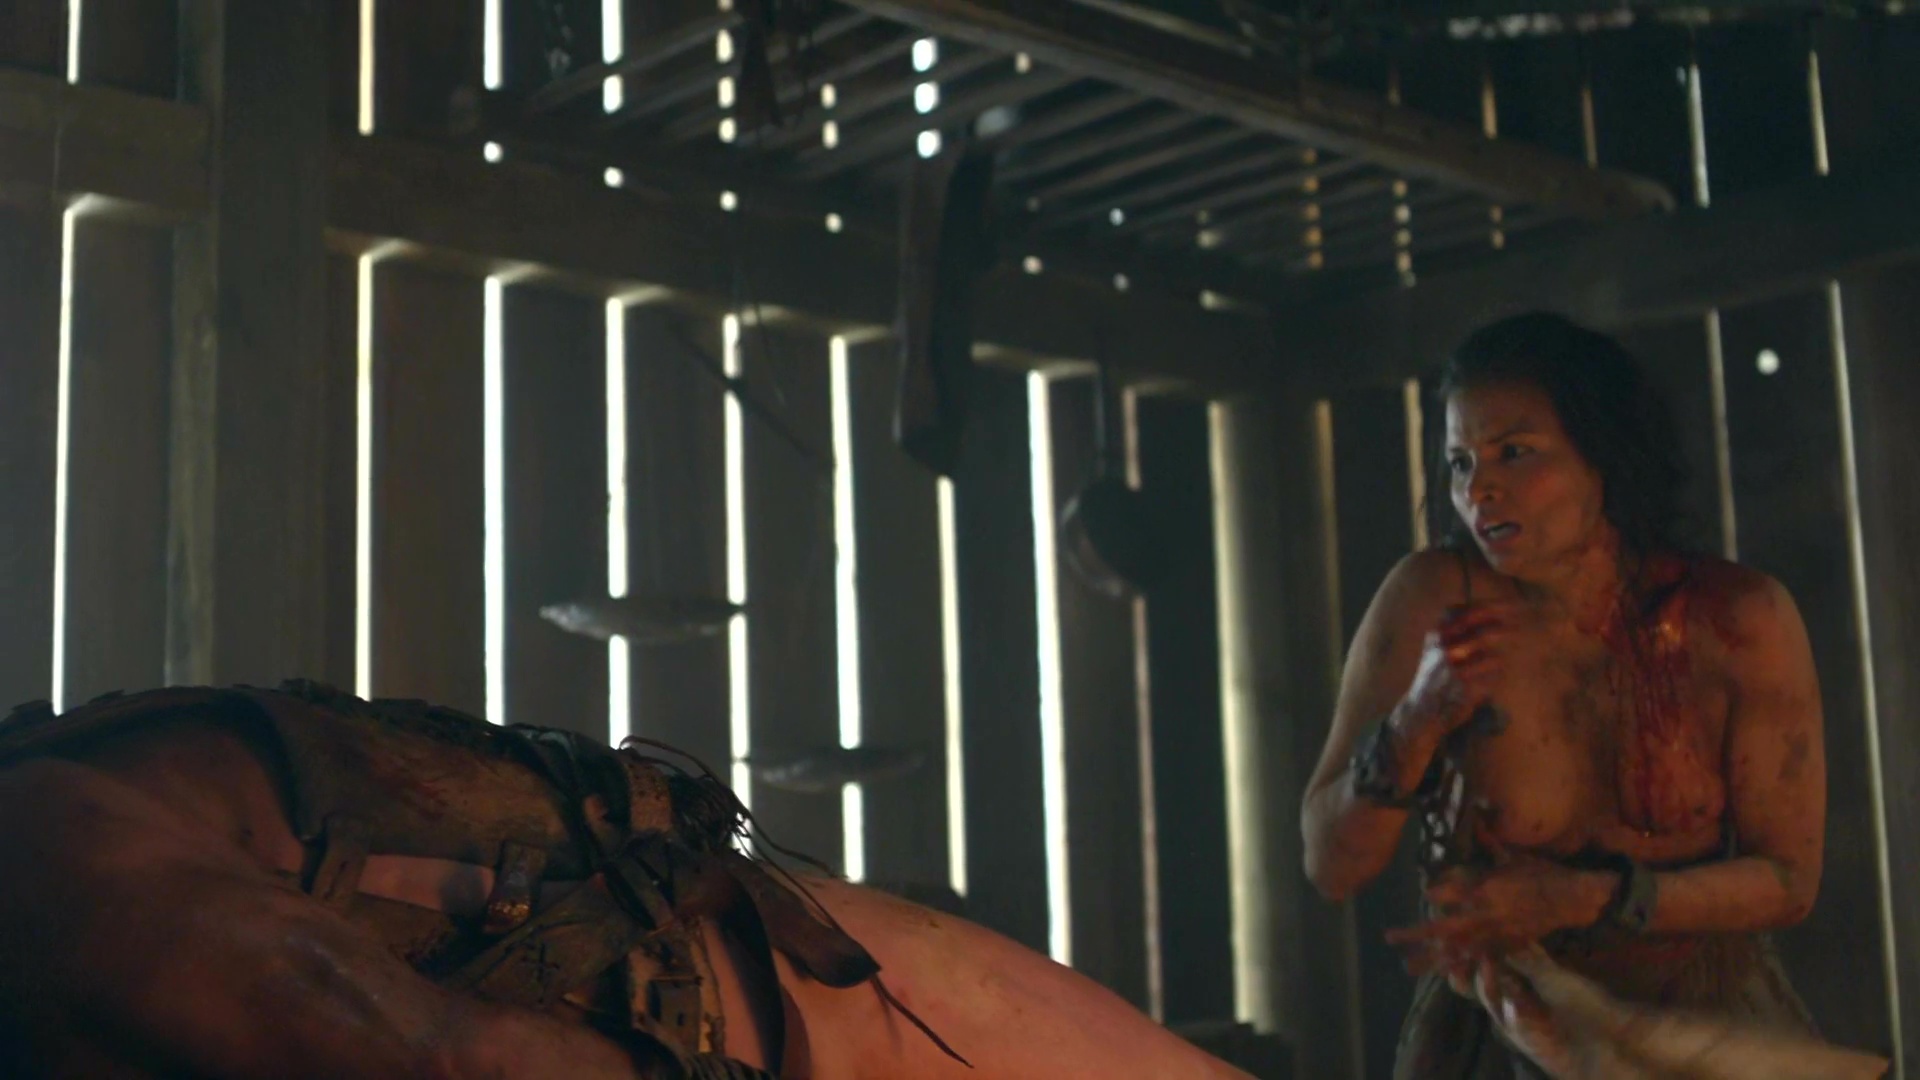 Naked Katrina Law In Spartacus Vengeance